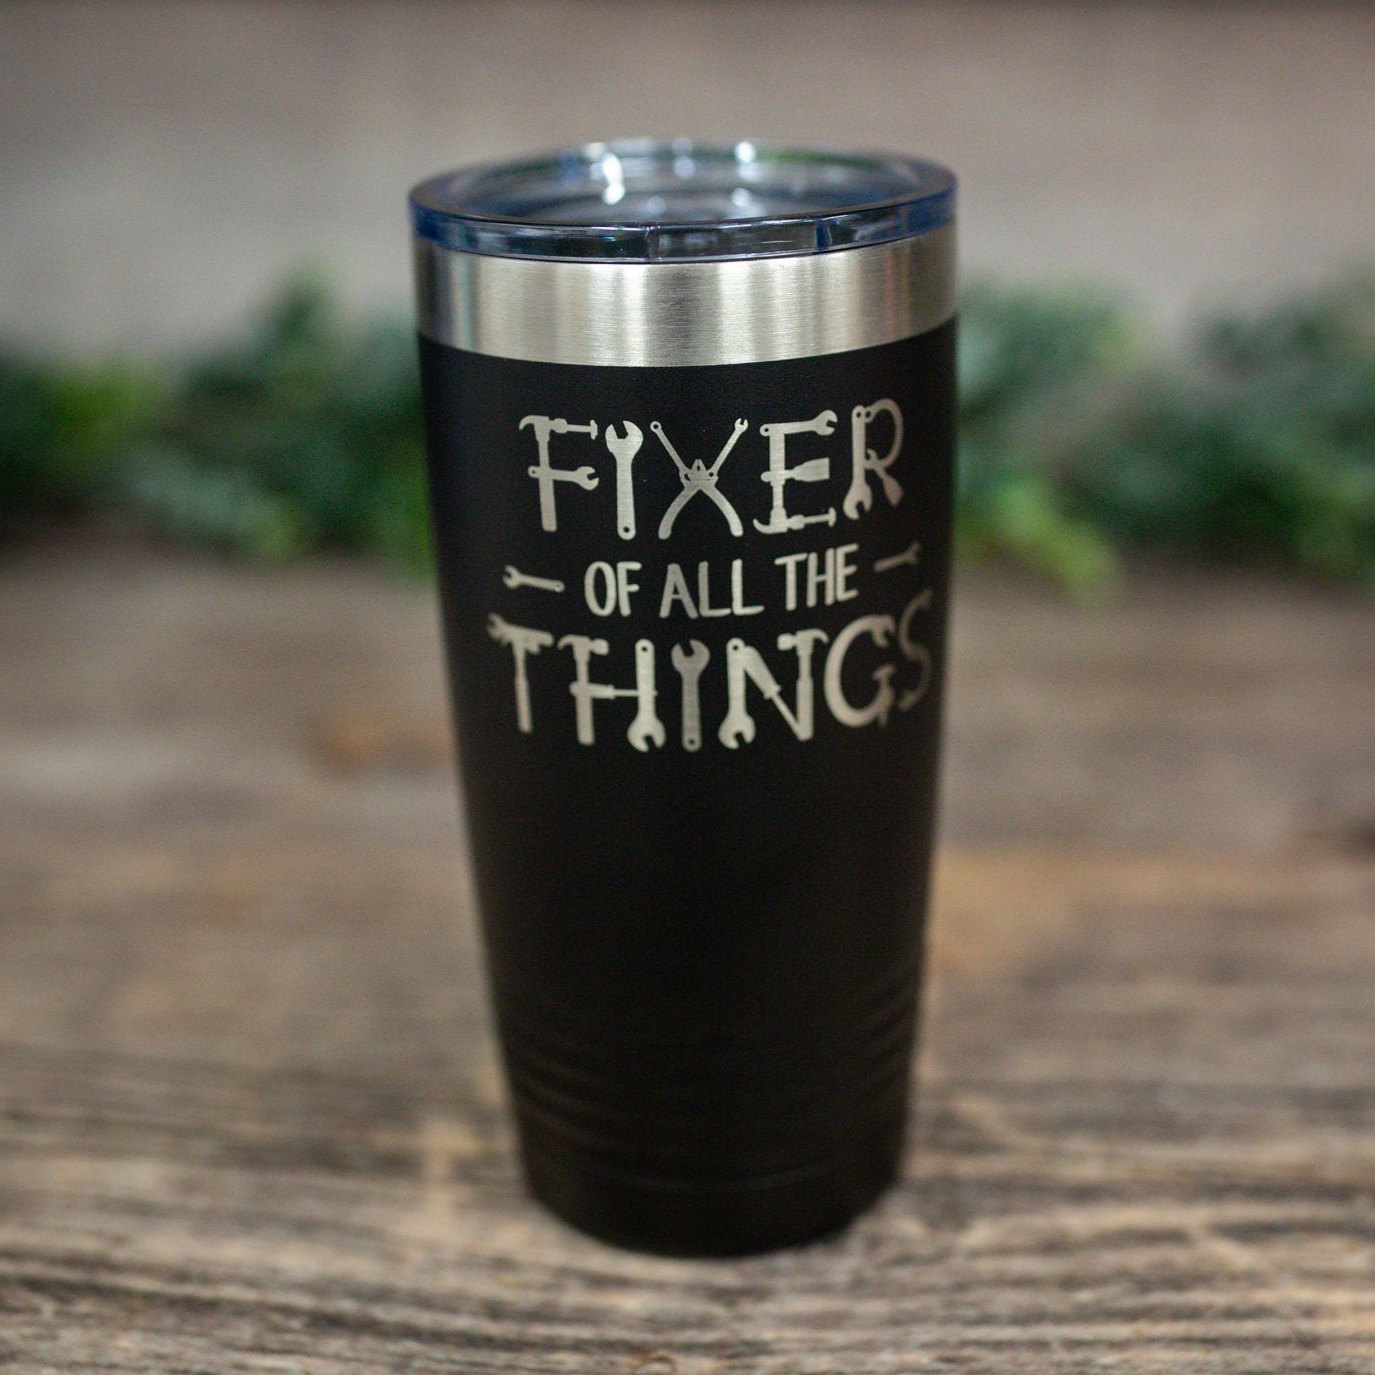 https://3cetching.com/wp-content/uploads/2021/07/fixer-of-all-of-the-things-engraved-stainless-steel-tumbler-funny-tumbler-mug-for-him-tumbler-for-dad-60f75f2f.jpg